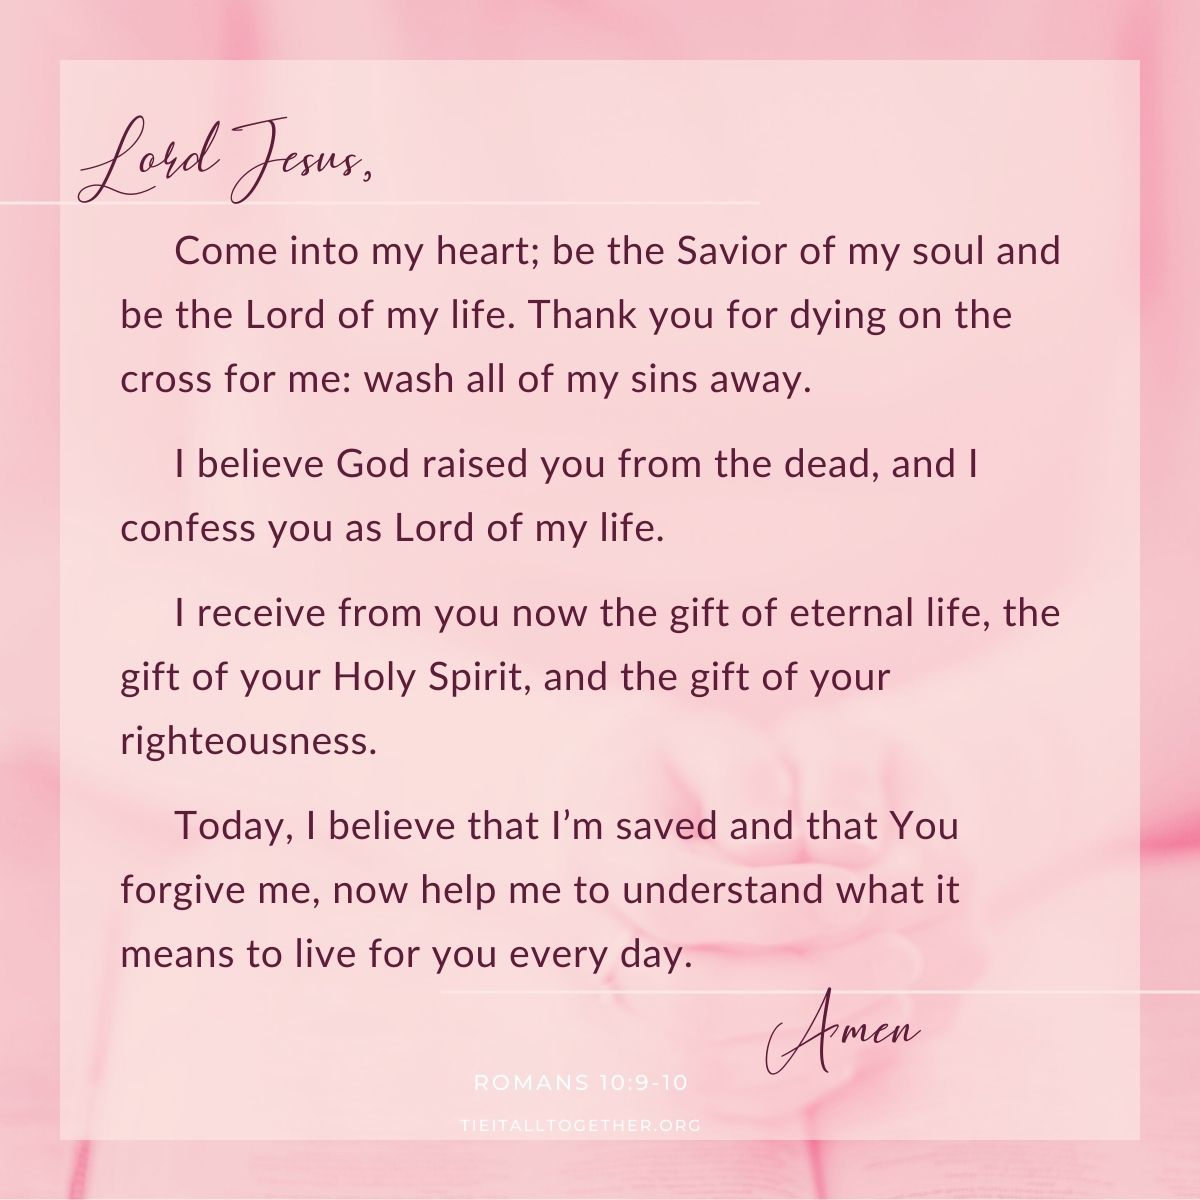 Lord Jesus, come into my heart.  Be the savior of my soul and be the Lord of my life.  Thank you for dying on the cross for me, wash all of my sins away.  I believe God raised you from the dead, and I confess you as Lord of my life.  I receive from you now the gift of eternal life, the gift of your Holy Spirit, and the gift of your righteousness.  Today, I believe that I’m saved and that You forgive me, now help me to understand what it means to live for you every day. Amen.  (Romans 10:9-10)